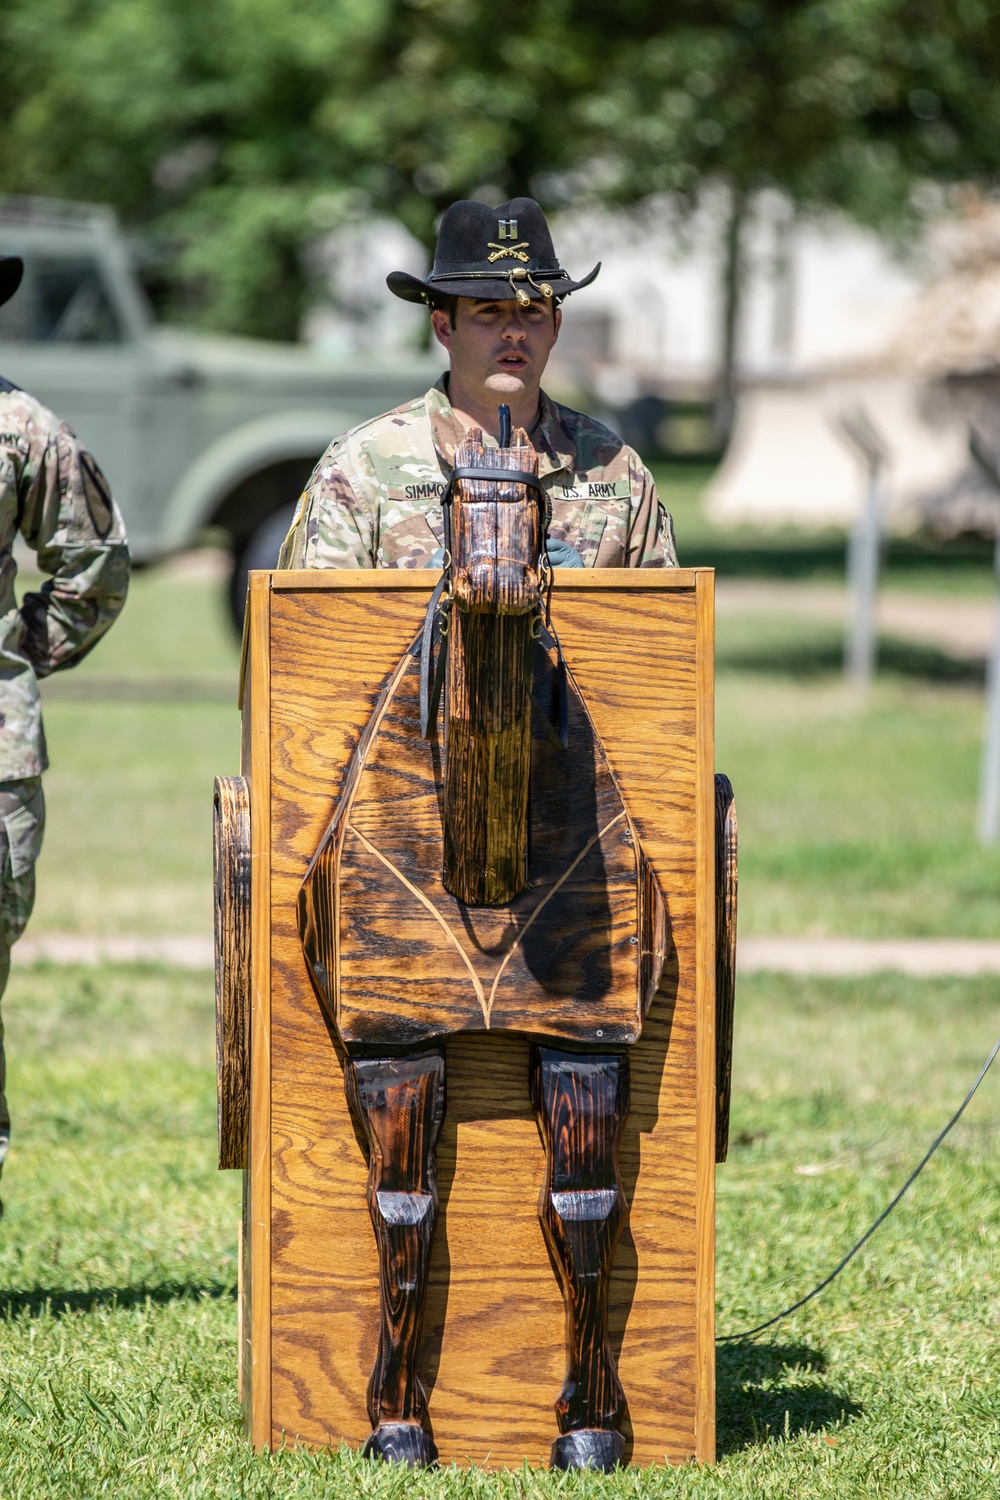 502nd HRC “Rough Riders” Change of Command